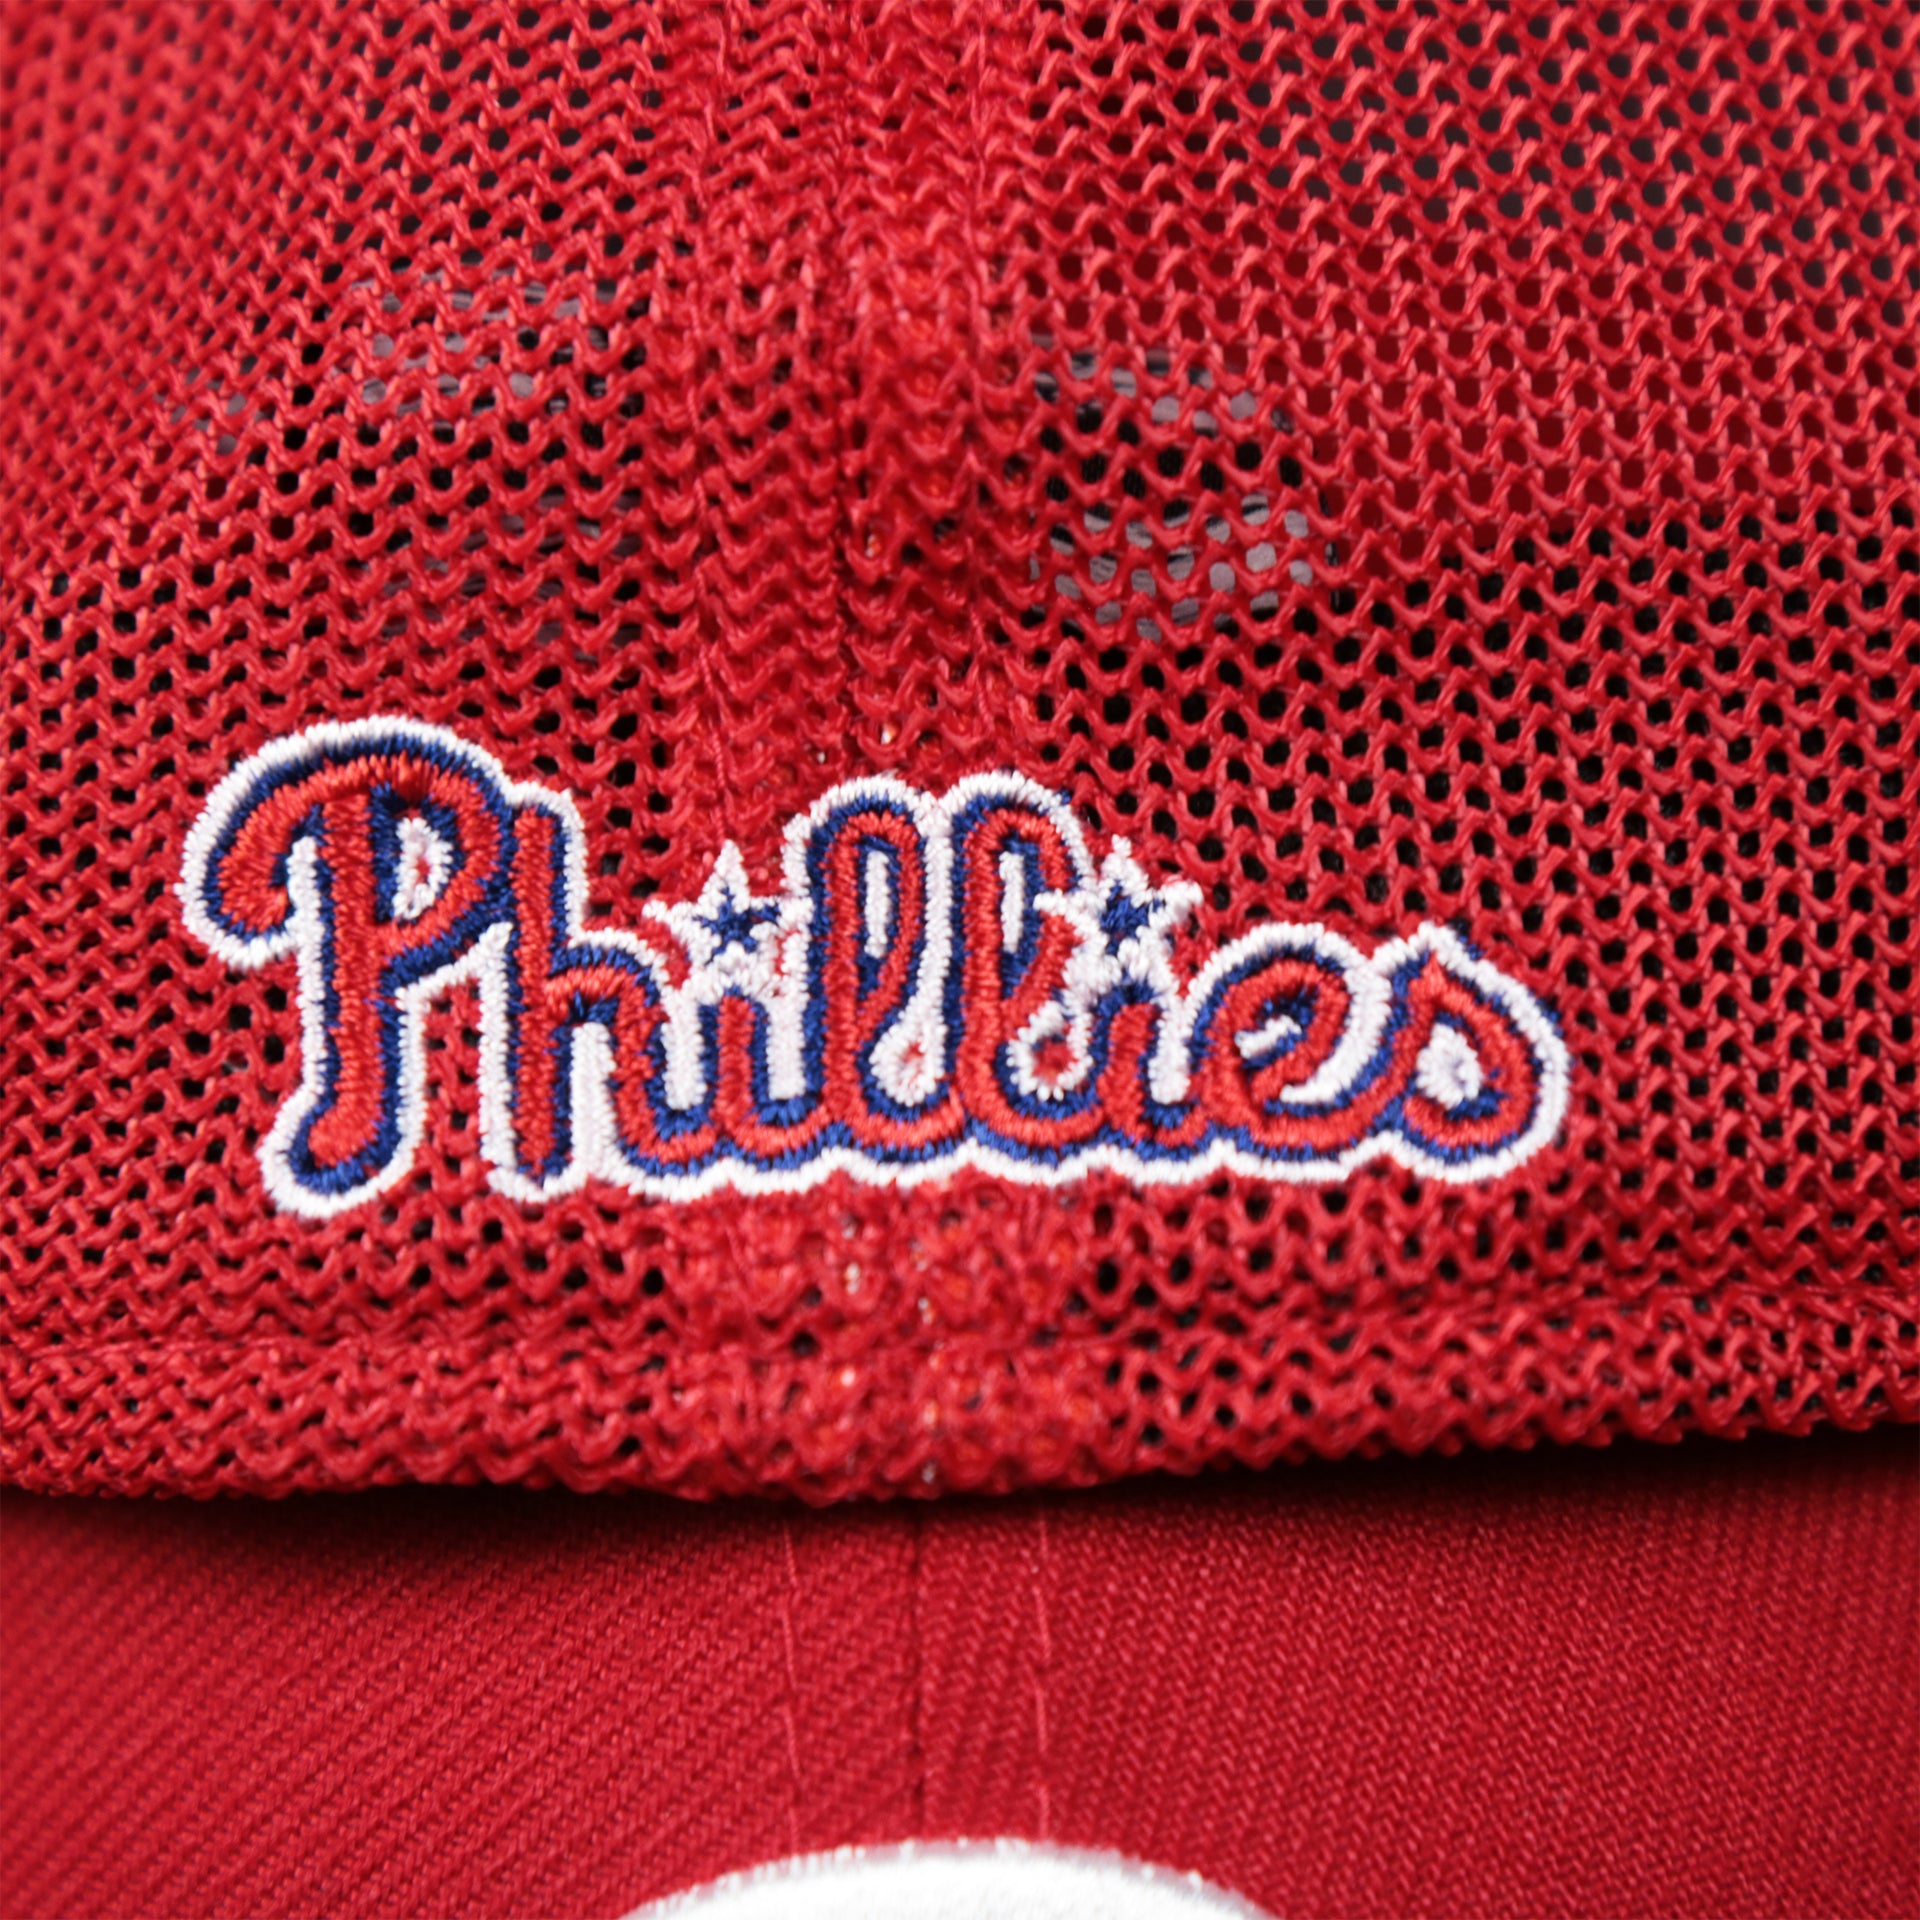 The Phillies Wordmark Logo on the Philadelphia Phillies Metallic All Star Game MLB 2022 Side Patch 39Thirty Mesh FlexFit Cap | ASG 2022 Red 39Thirty Cap